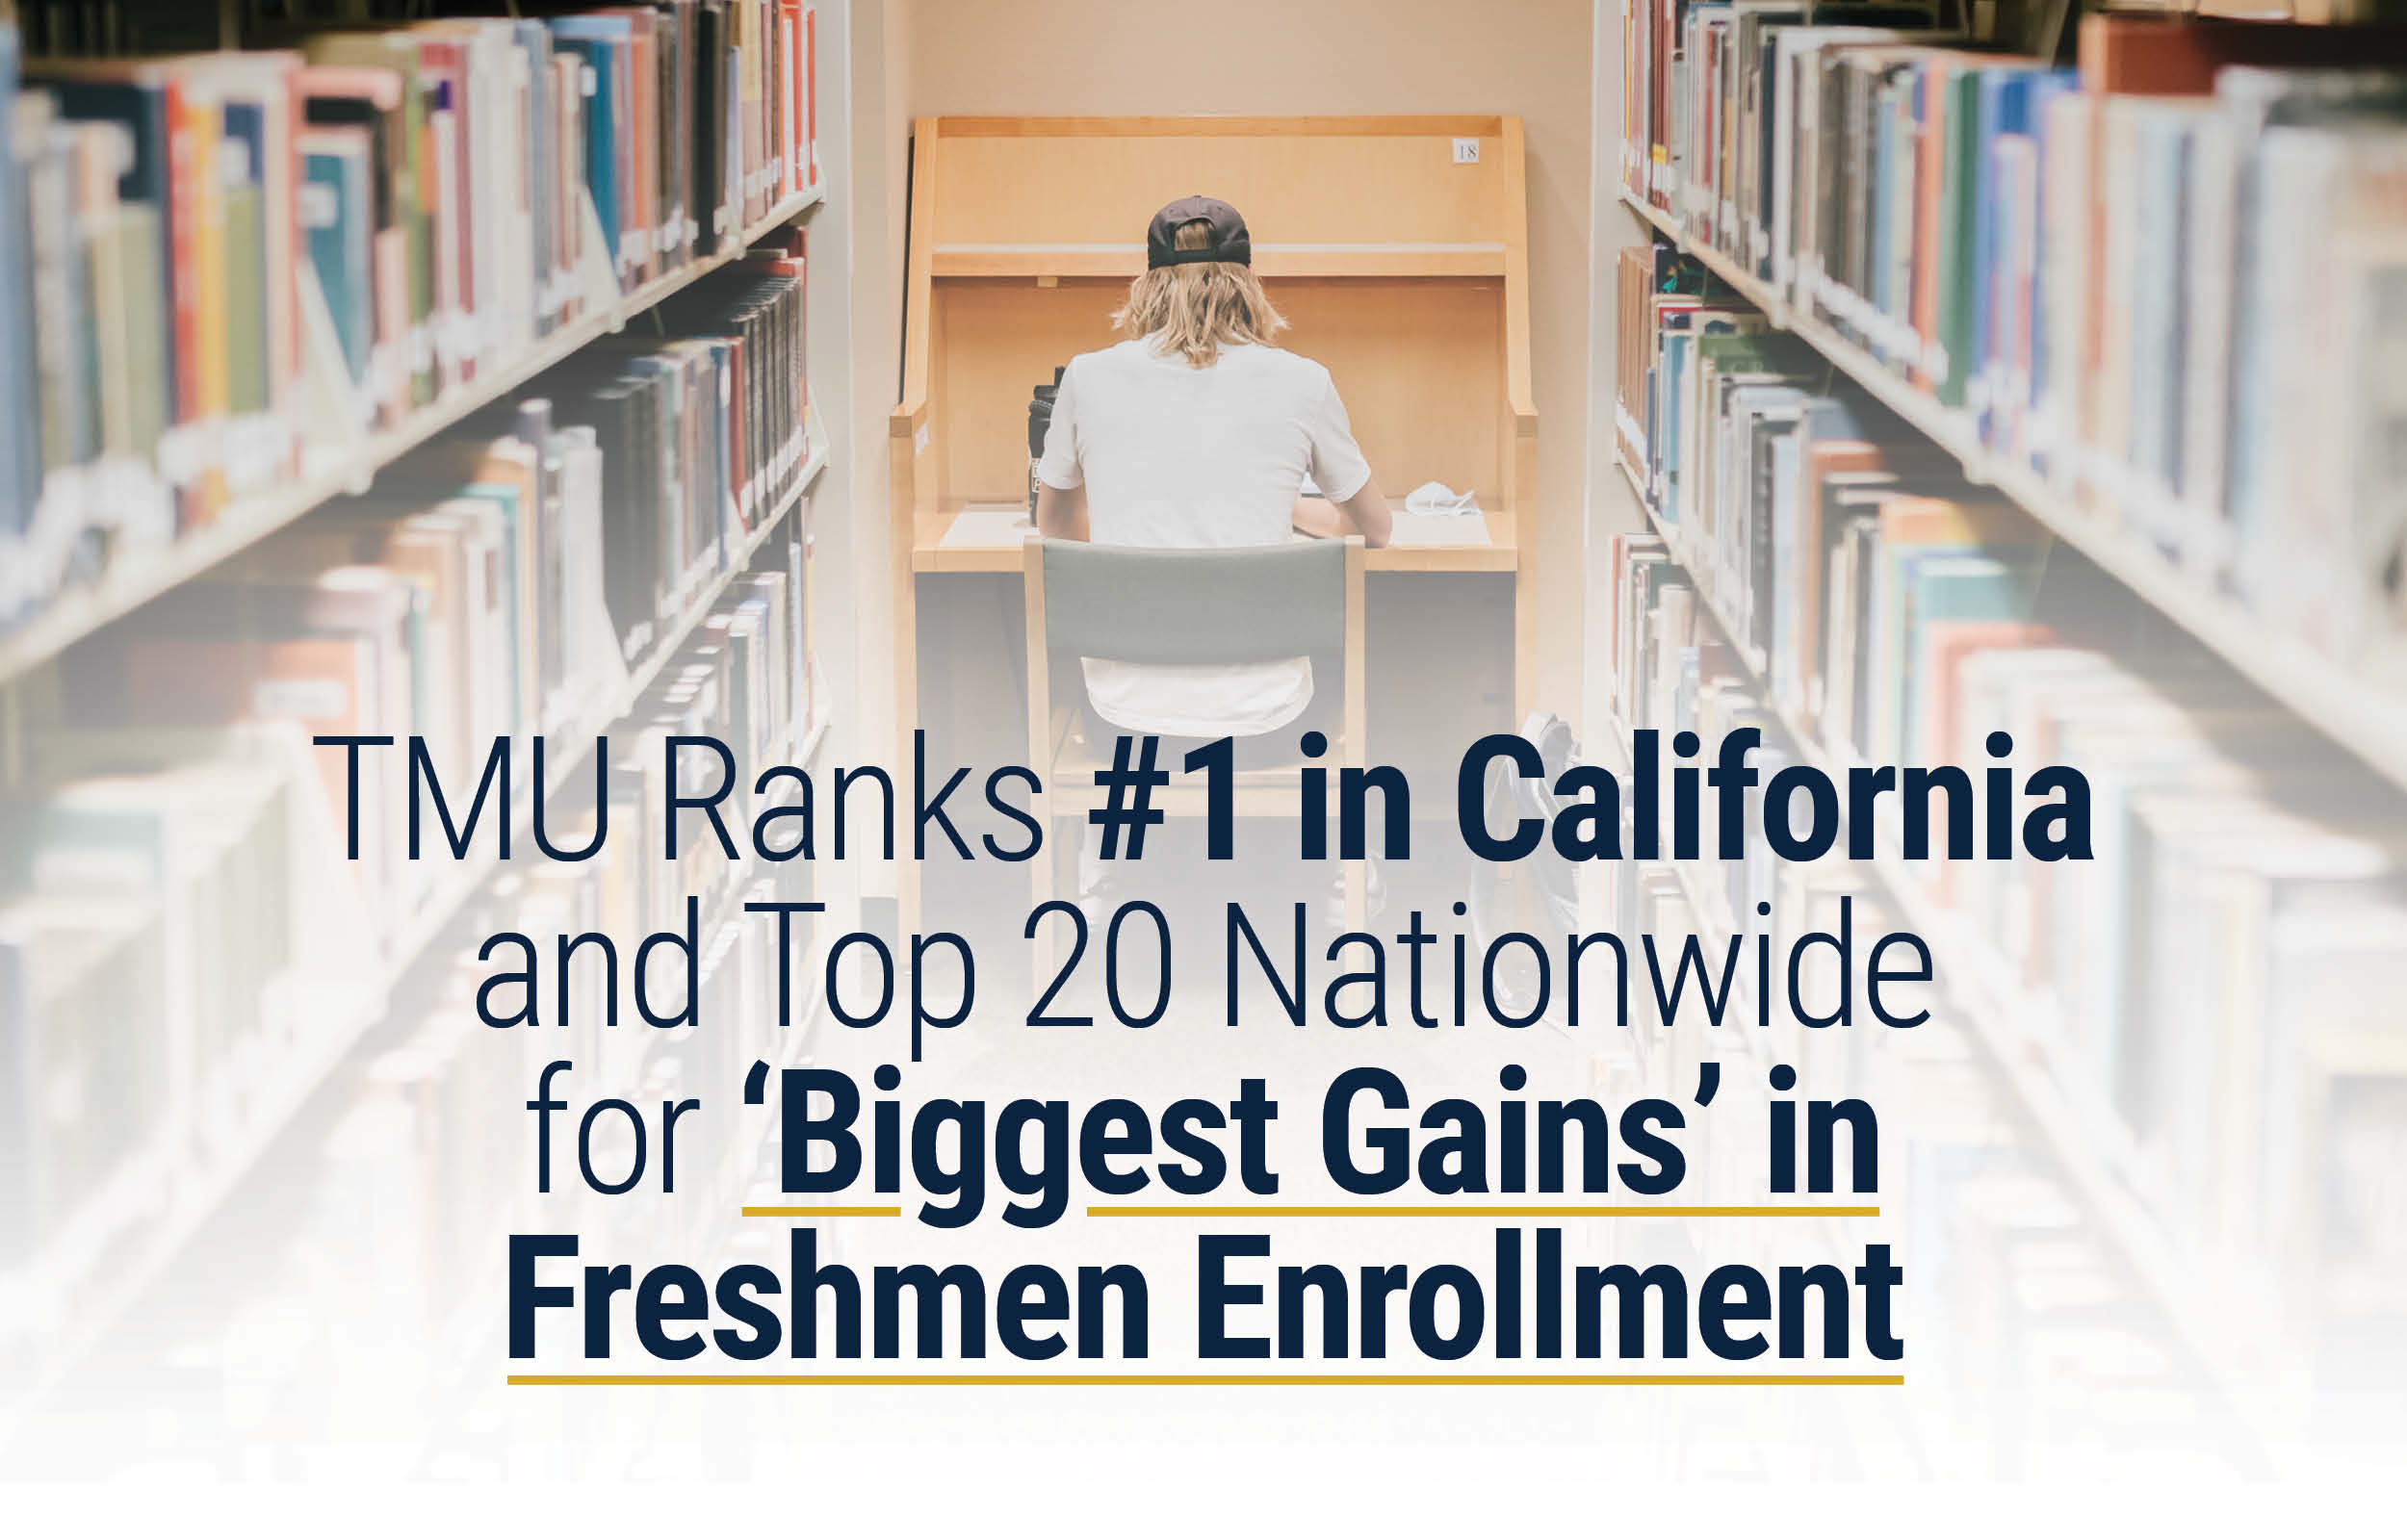 TMU Ranks #1 in California and Top 20 Nationwide for ”Biggest Gains” in Freshmen Enrollment Featured Image